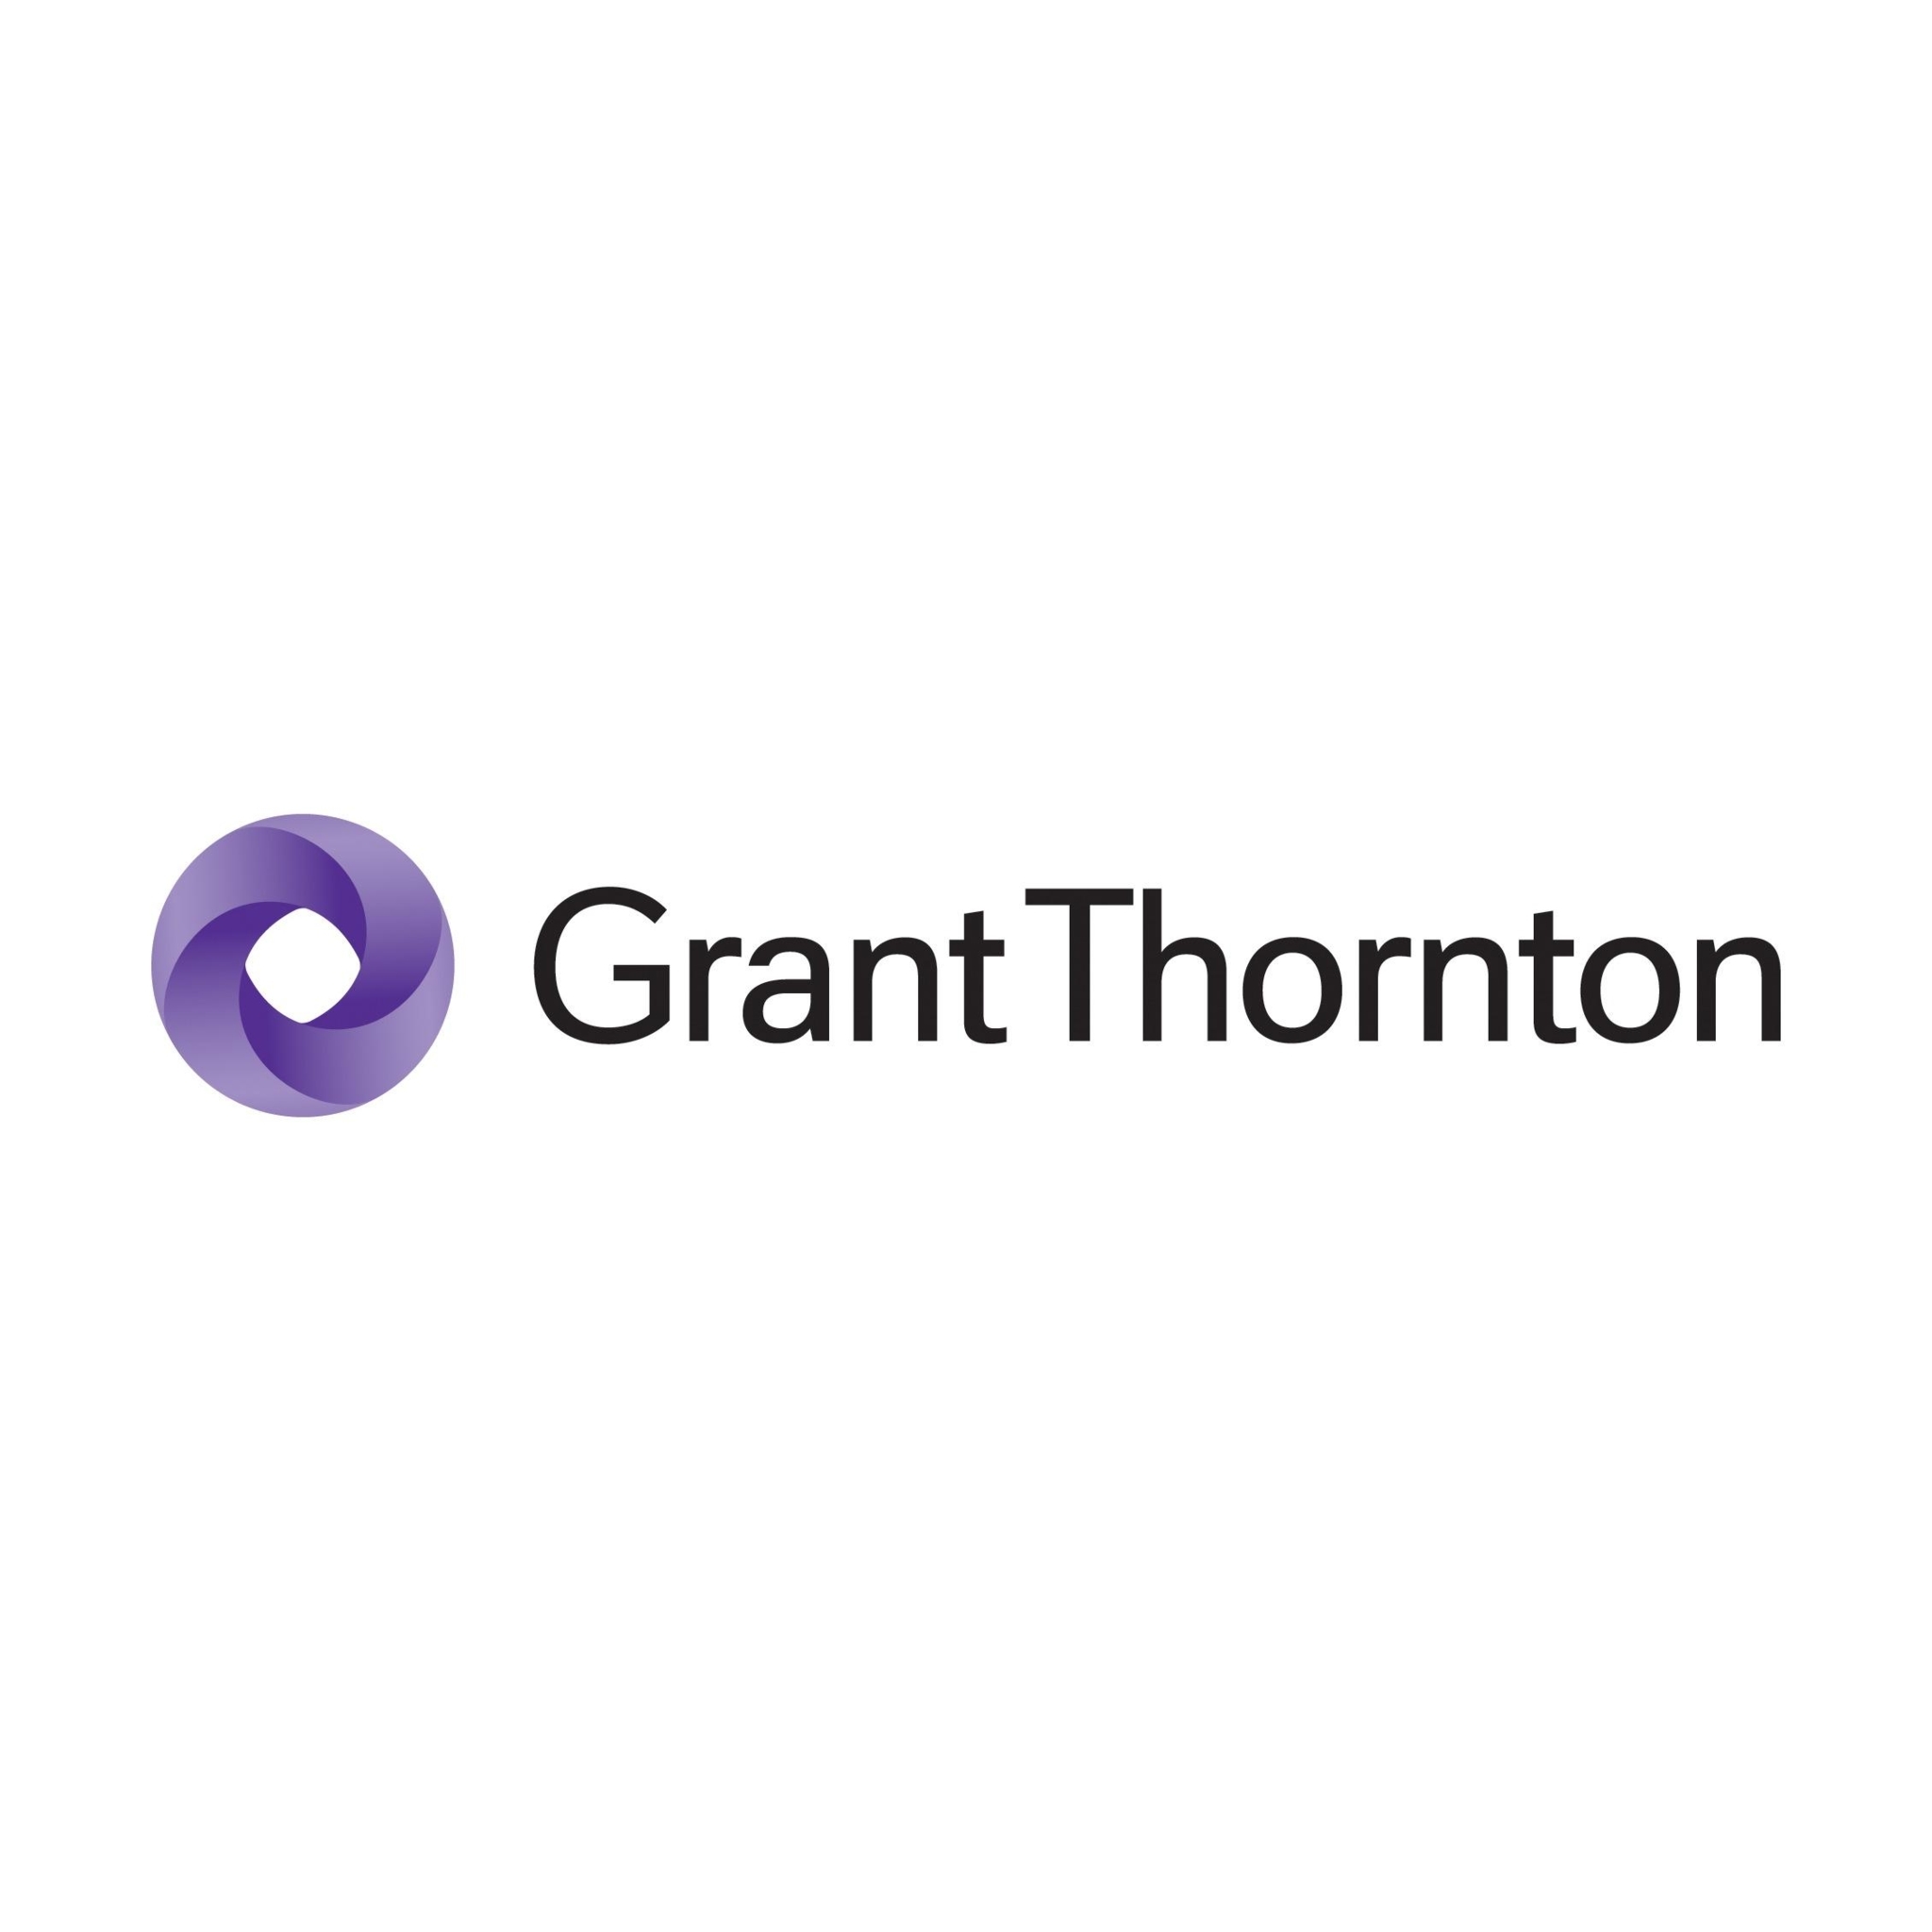 Grant Thornton Limited - Licensed Insolvency Trustees, Bankruptcy and Consumer Proposals - Credit & Debt Counselling